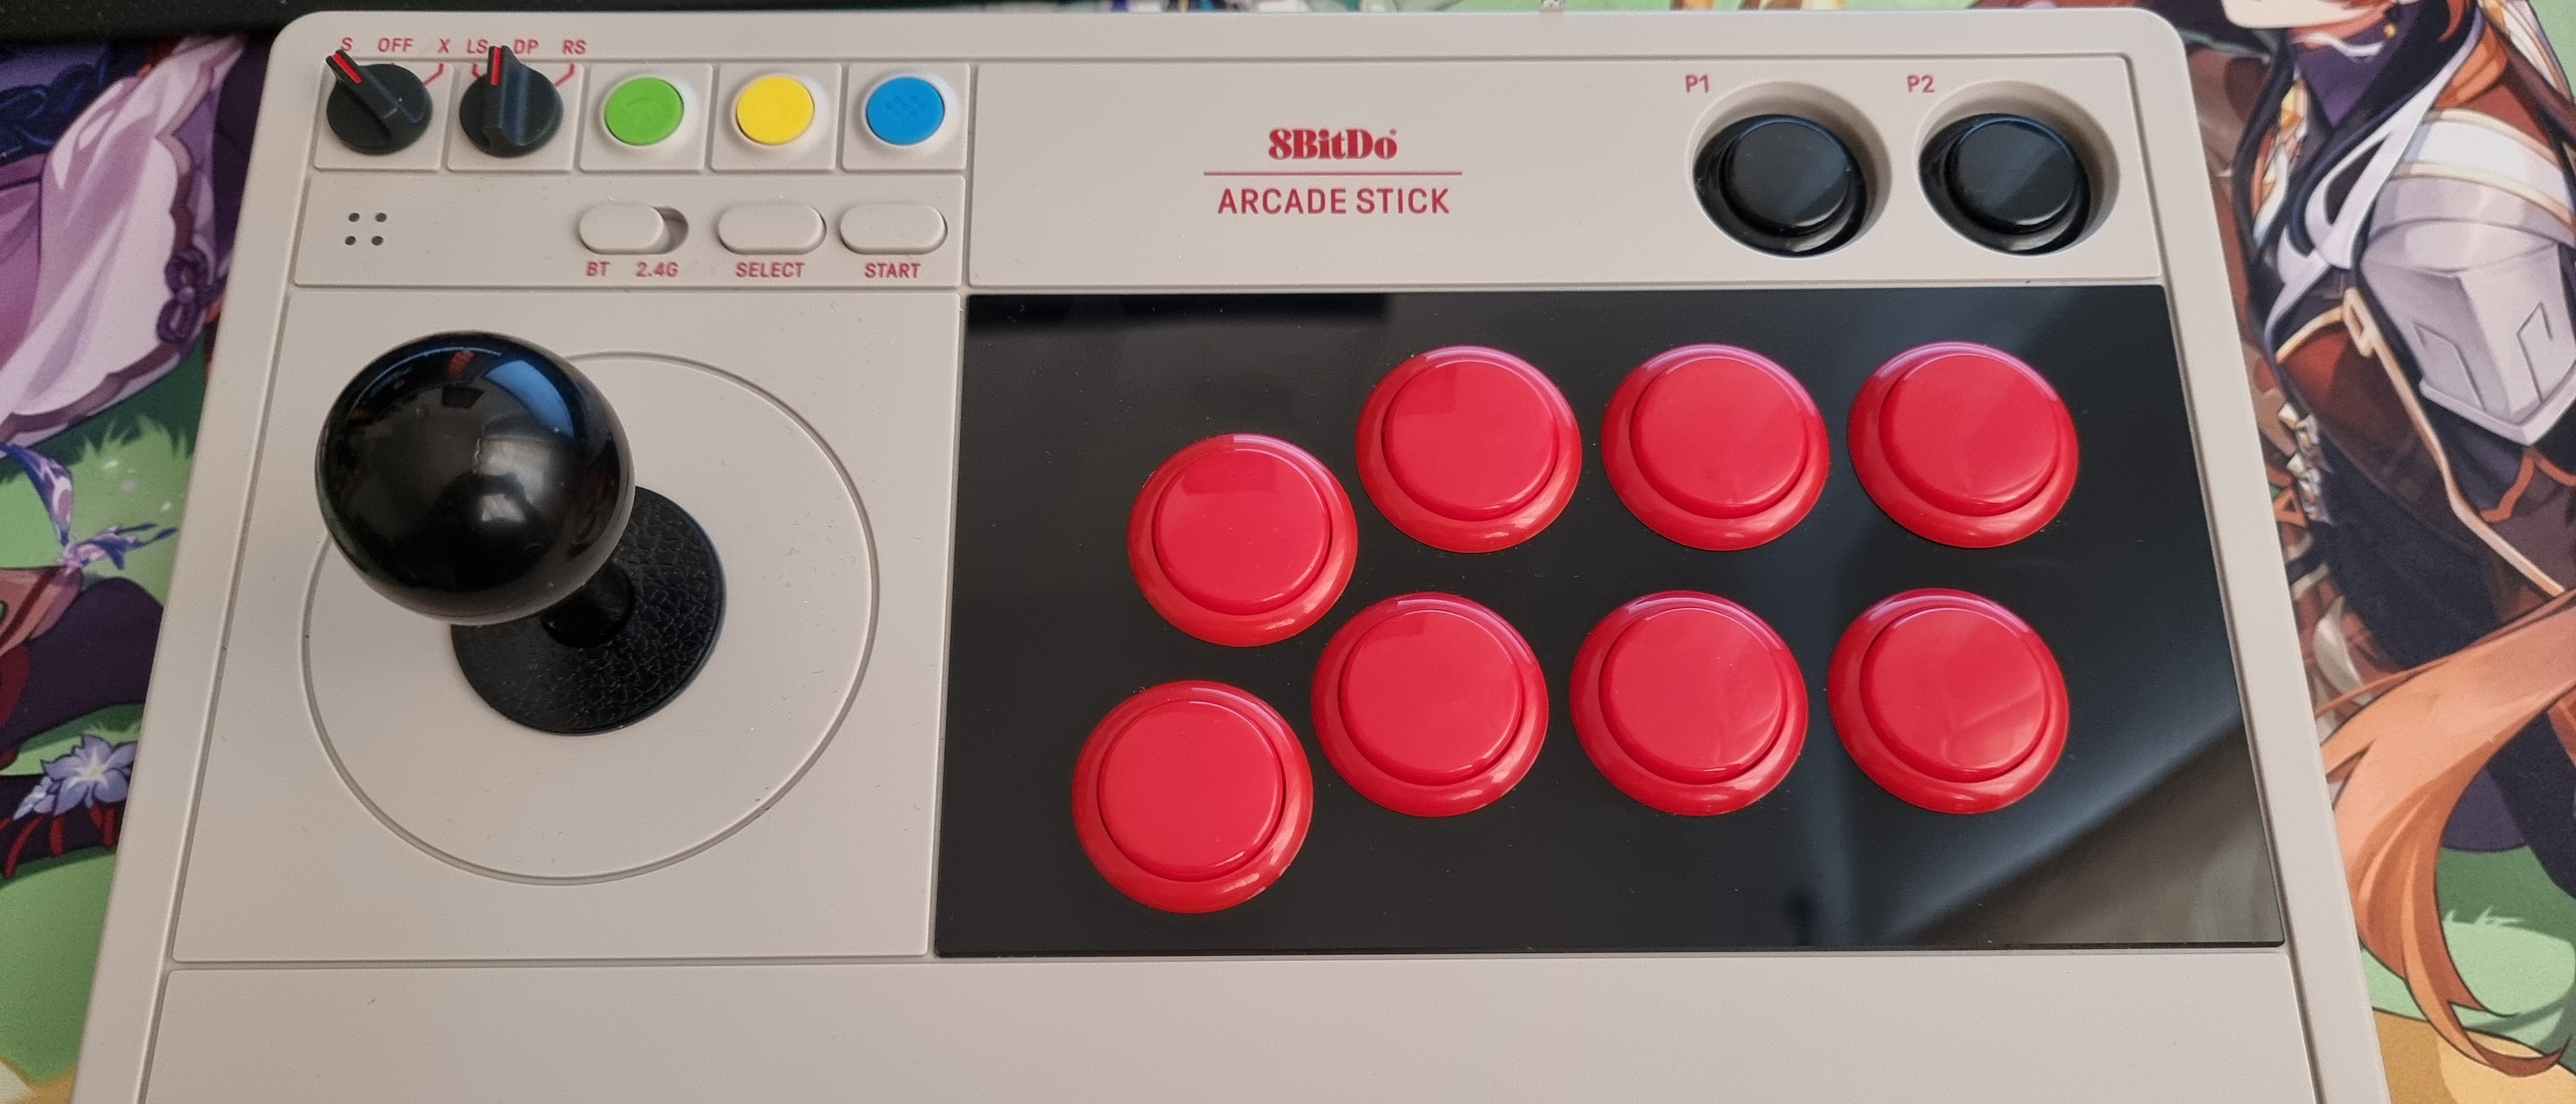 8BitDo Arcade Stick review - simply one of the best mid-range sticks